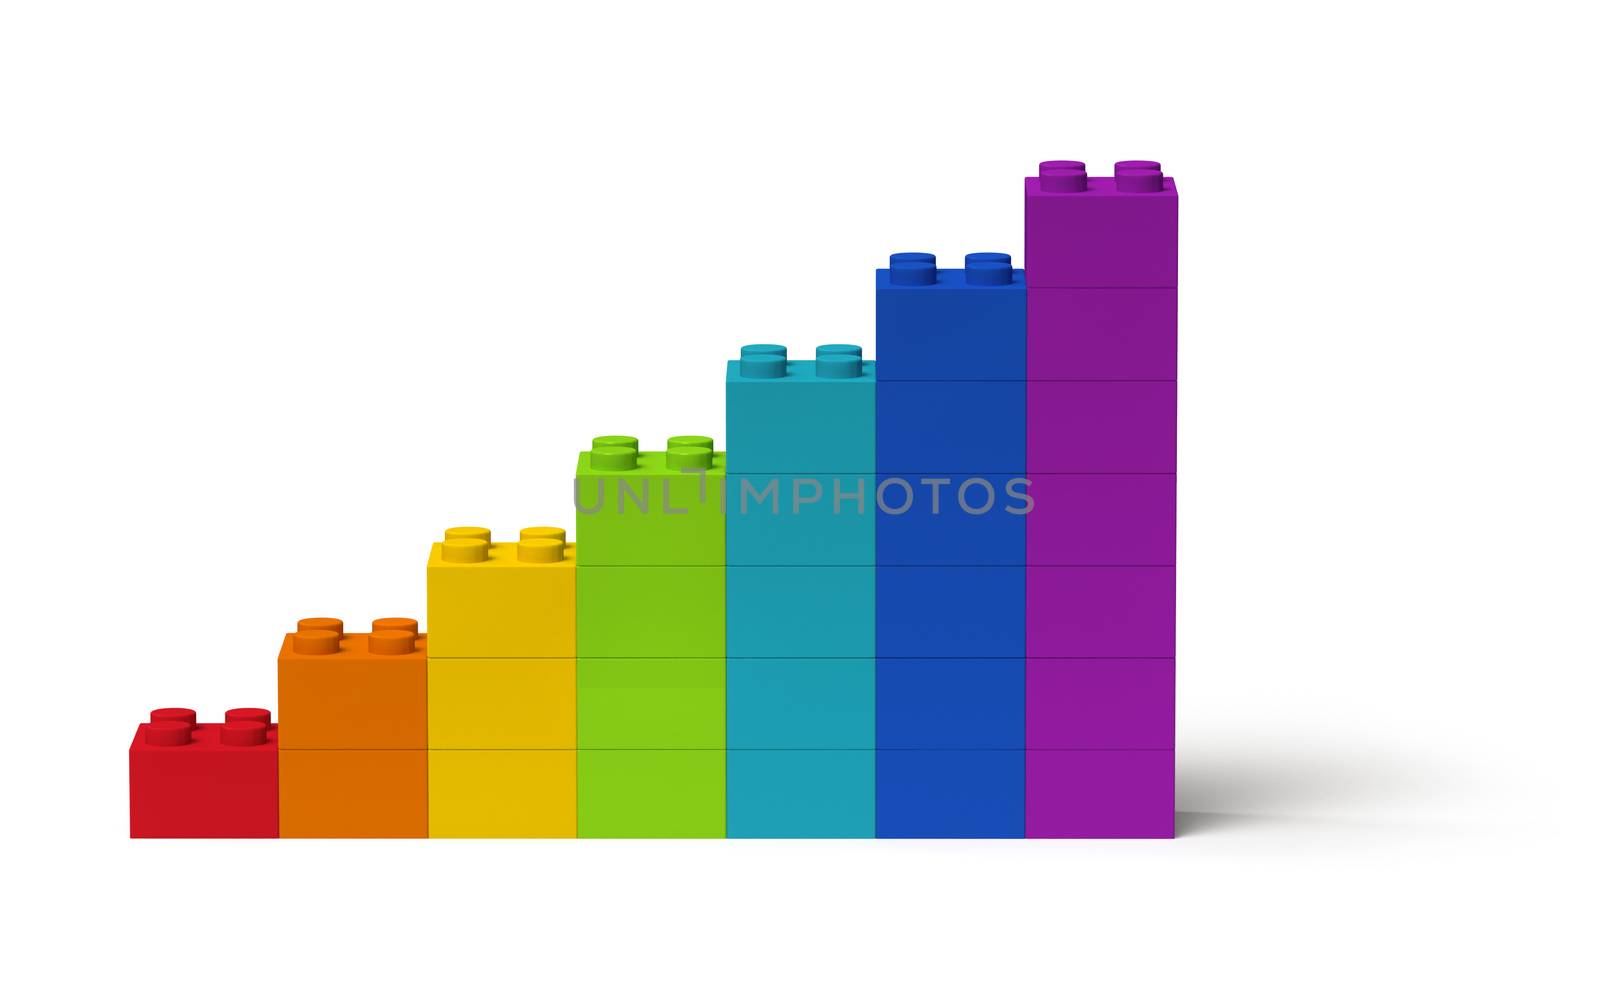 Bar chart diagram with rainbow colors showing steady growth 3d, isolated on white